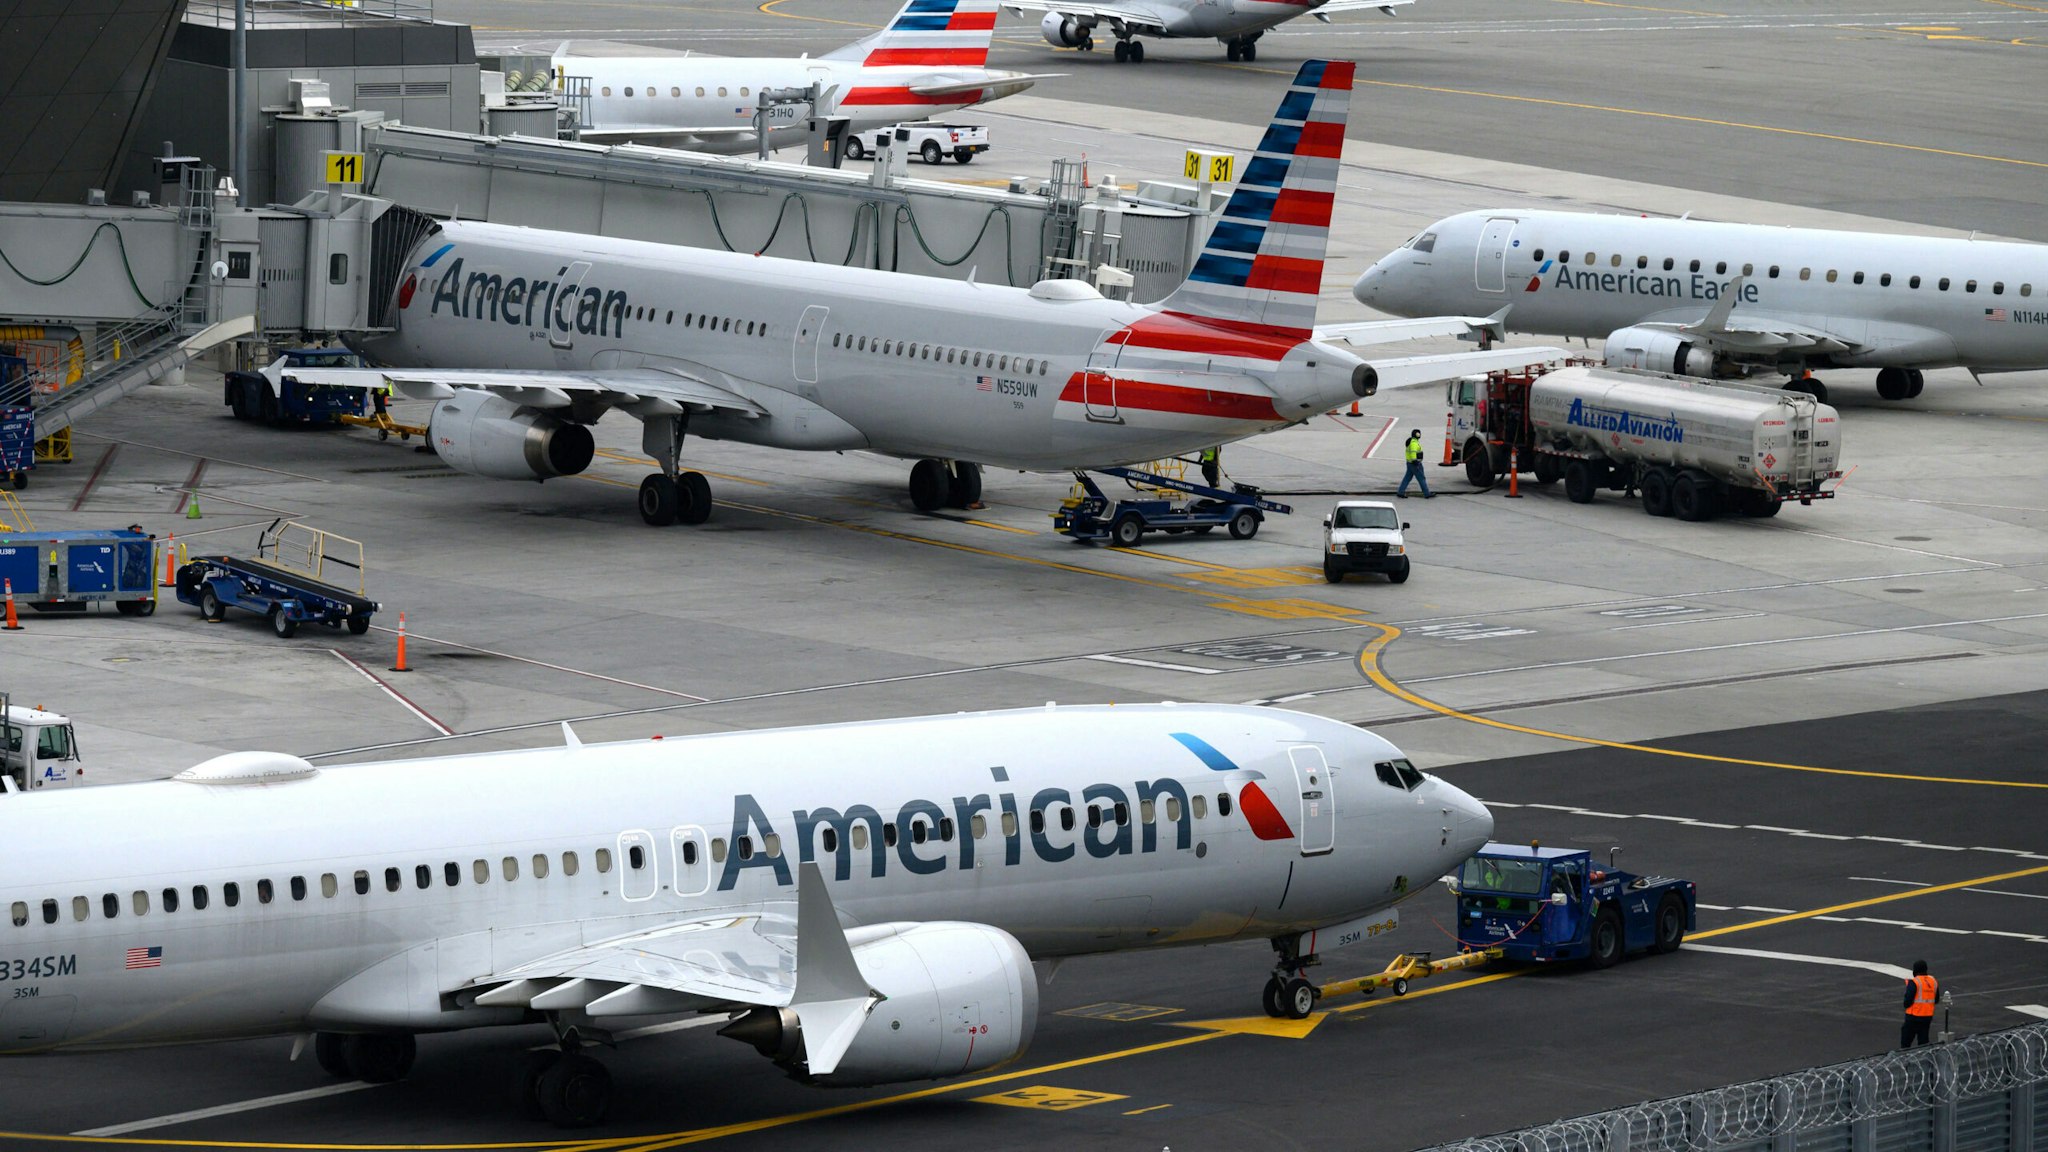 American Airlines airplanes sit on the tarmac at LaGuardia airport in New York on January 11, 2023. - The US Federal Aviation Authority said Wednesday that normal flight operations "are resuming gradually" across the country following an overnight systems outage that grounded departures.